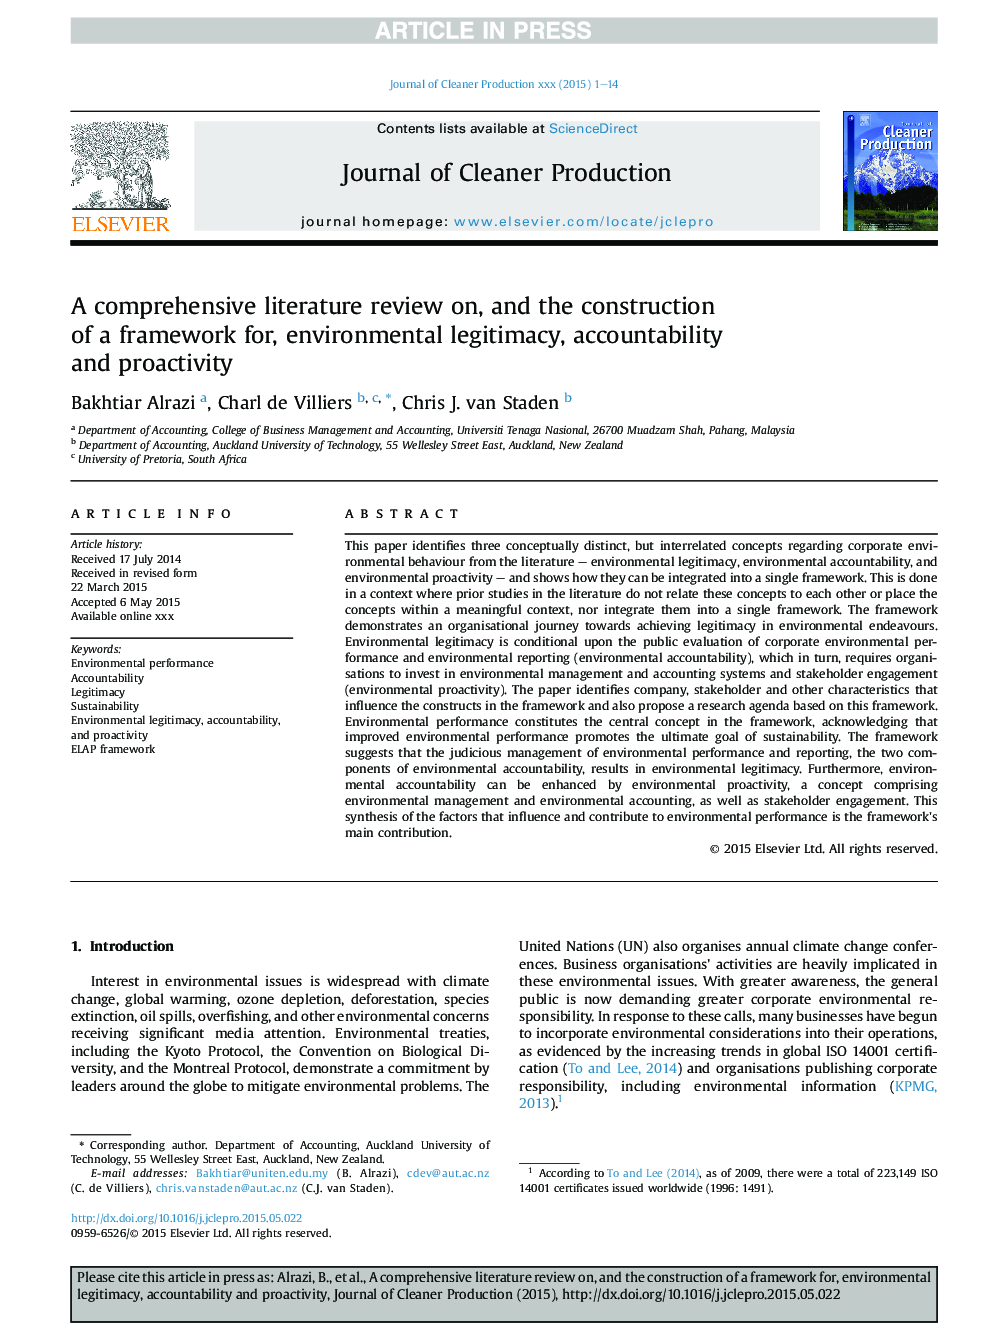 A comprehensive literature review on, and the construction ofÂ aÂ framework for, environmental legitimacy, accountability andÂ proactivity